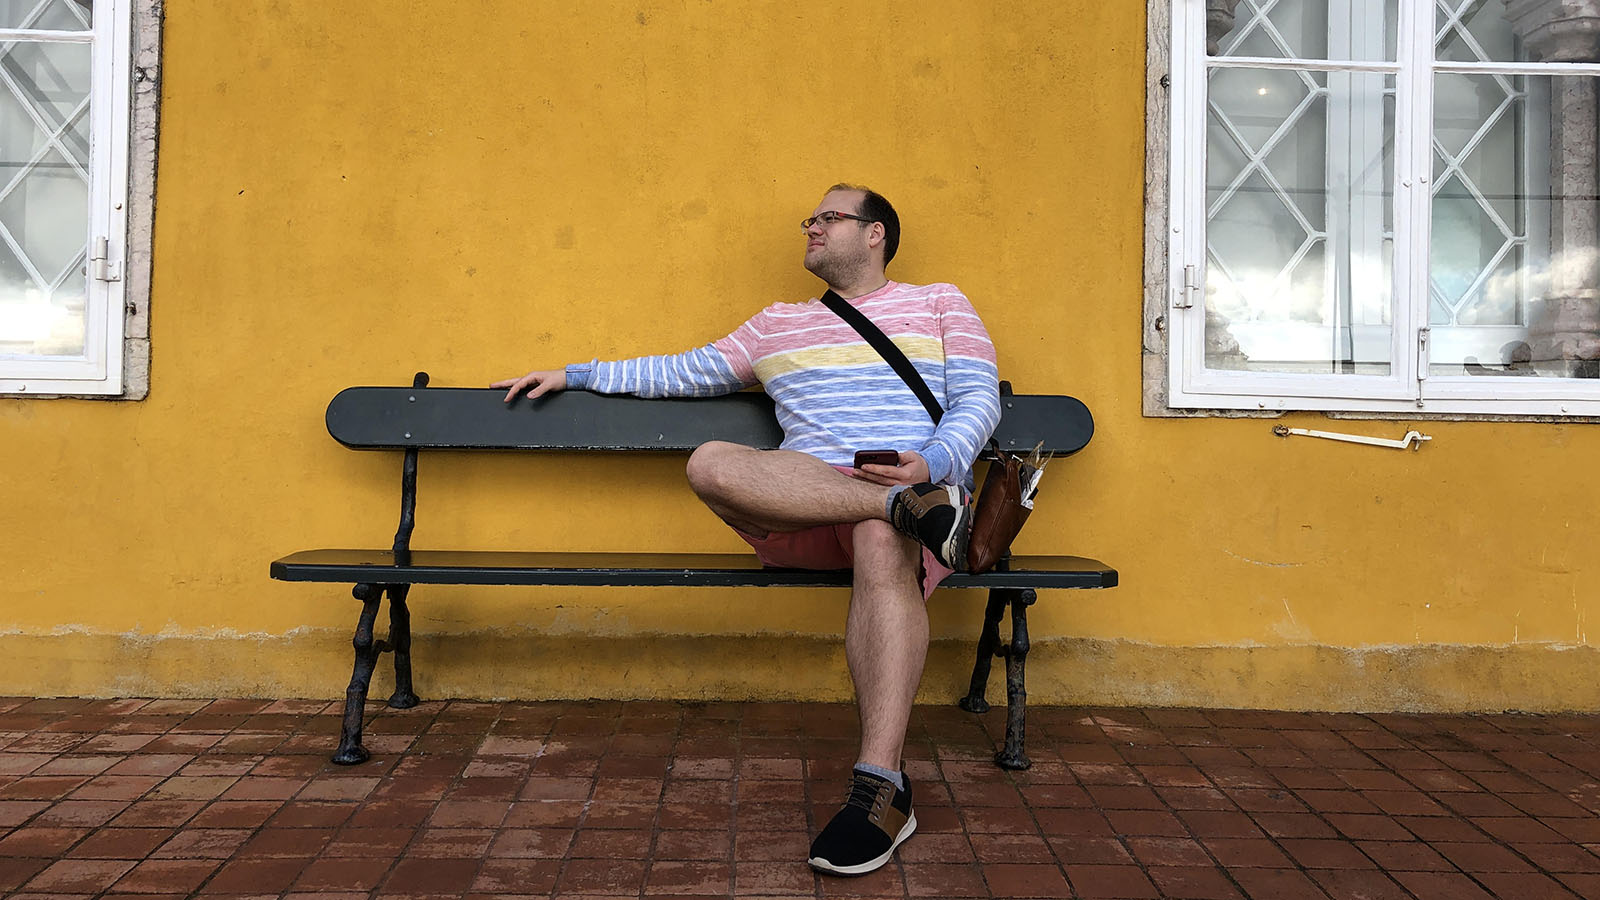 Composer Cameron Wentz sitting on a bench against a yellow-painted wall.